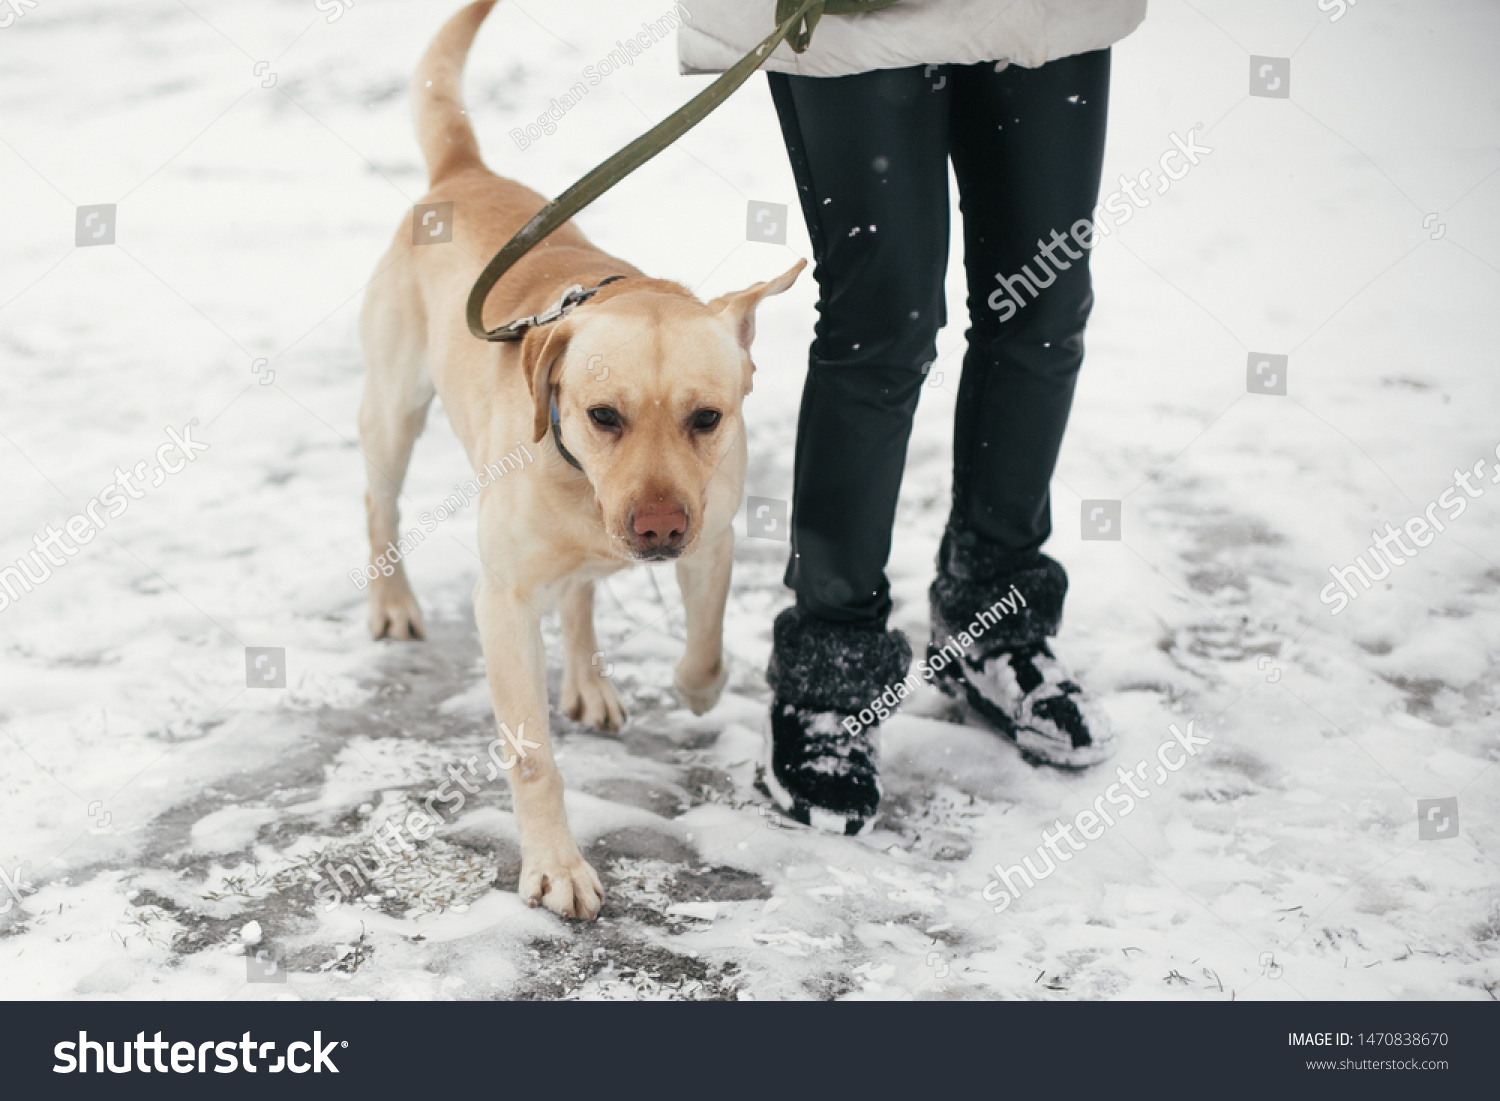 Cute golden labrador walking with owner in snowy winter park. Mixed breed labrador on a walk with person at shelter. Adoption concept. Stray dog #1470838670